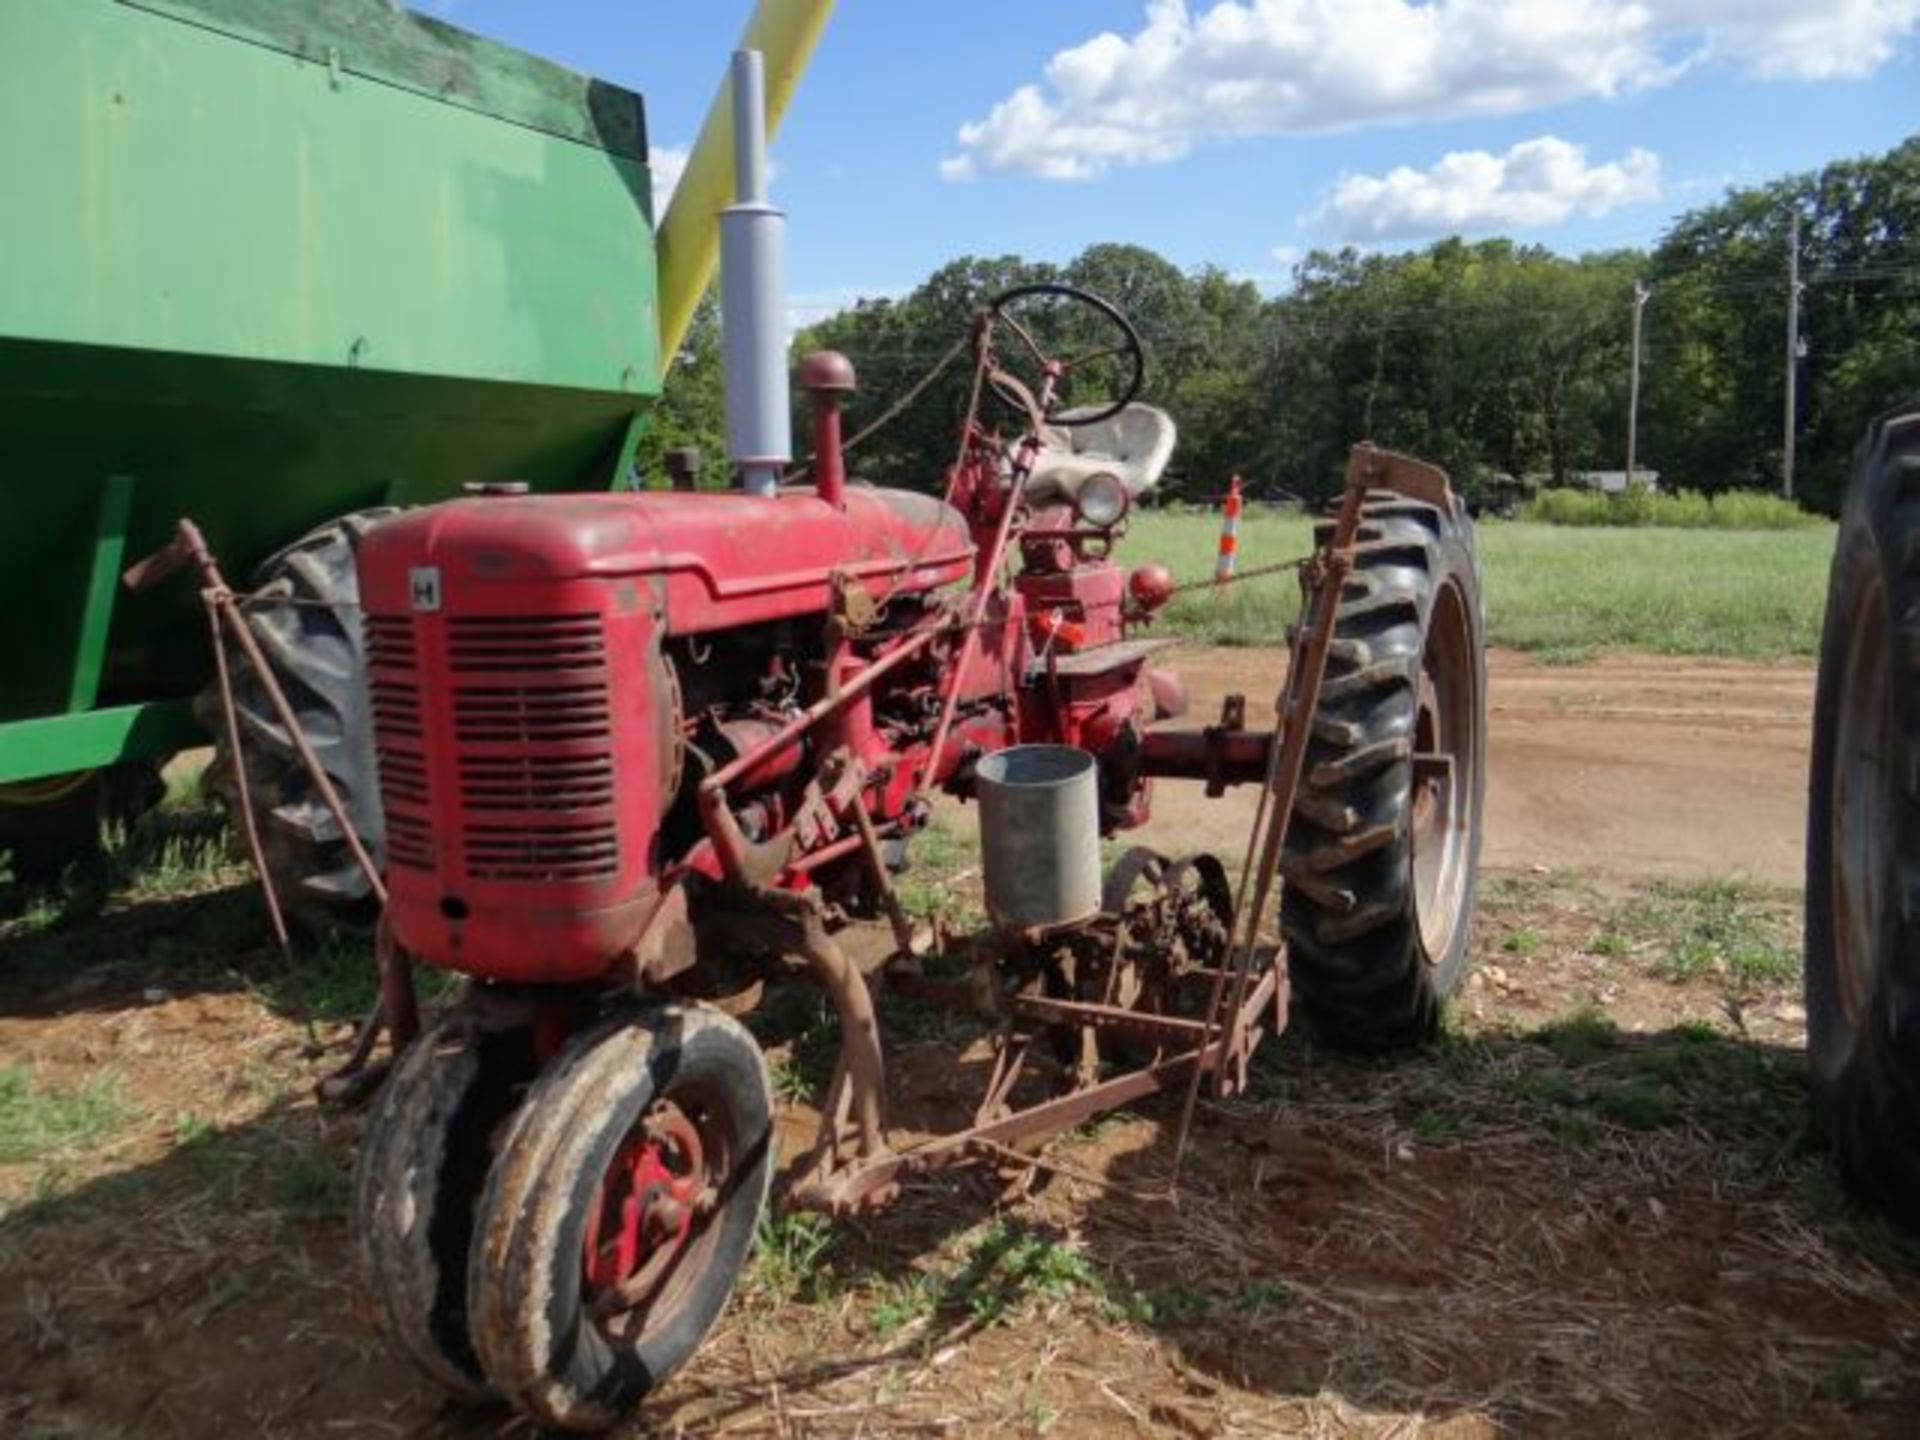 Lot 665 Farmall Super C Tractor Tricycle Front, 2 Row Mounted Planter and Marker, Runs Good, Set